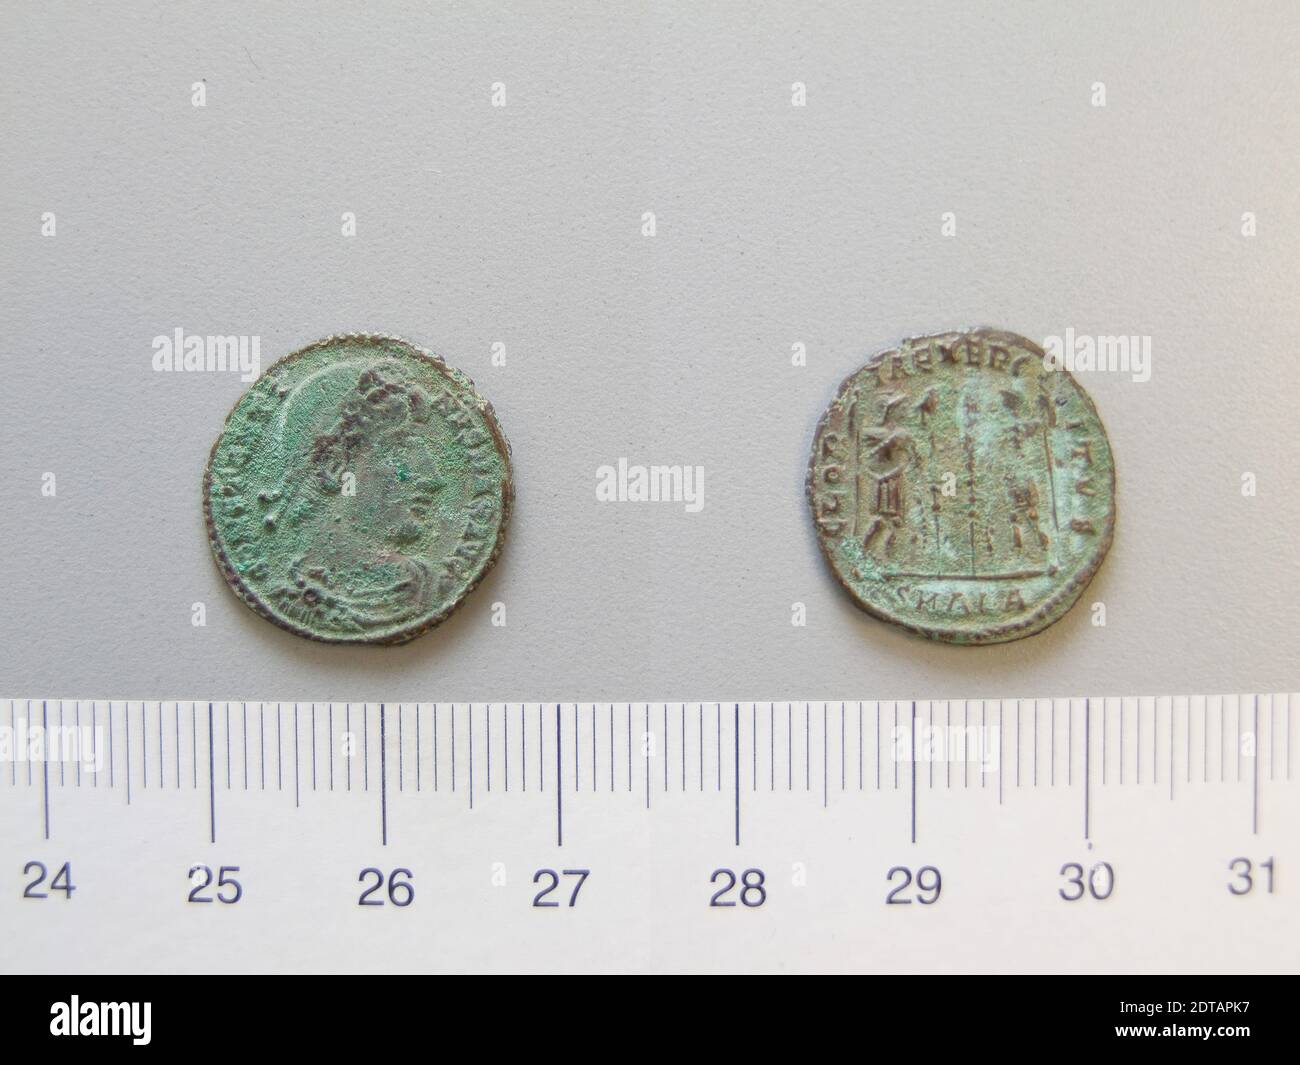 Ruler: Constantine I, Emperor of Rome, A.D. 285–337, ruled A.D. 306–337, Mint: Alexandria, 1 Nummus of Constantine I, Emperor of Rome from Alexandria, 335–37, Argentiferous bronze, 1.92 g, 11:00, 18.2 mm, Made in Alexandria, Egypt, Roman, 4th century, Numismatics Stock Photo